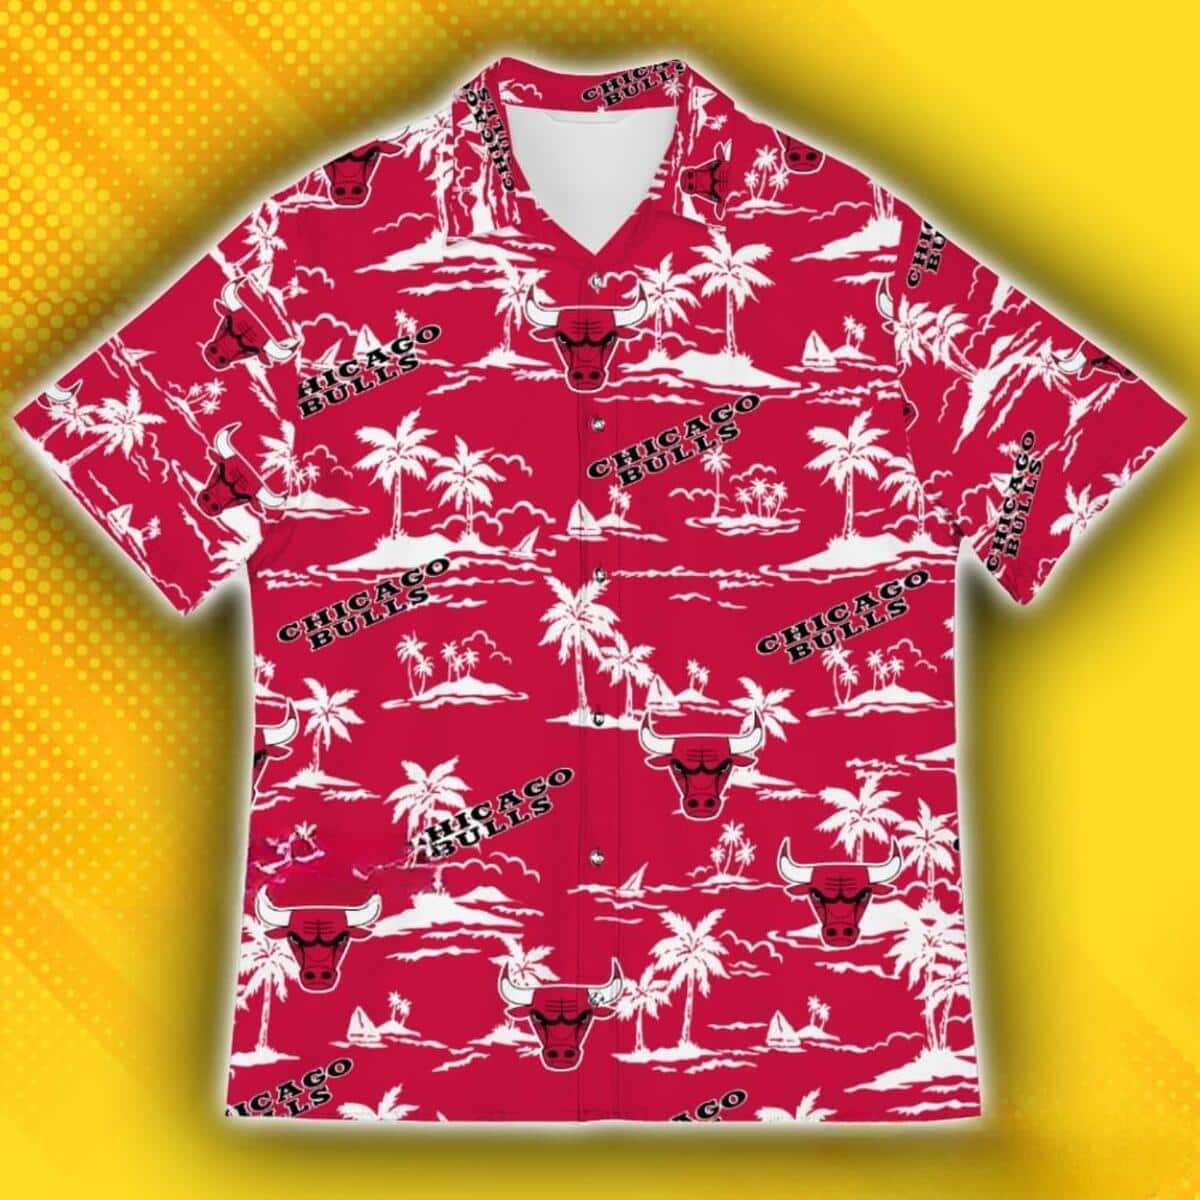 Chicago Bulls Hawaii Tropical Patterns Ugly Christmas Sweater For Fans